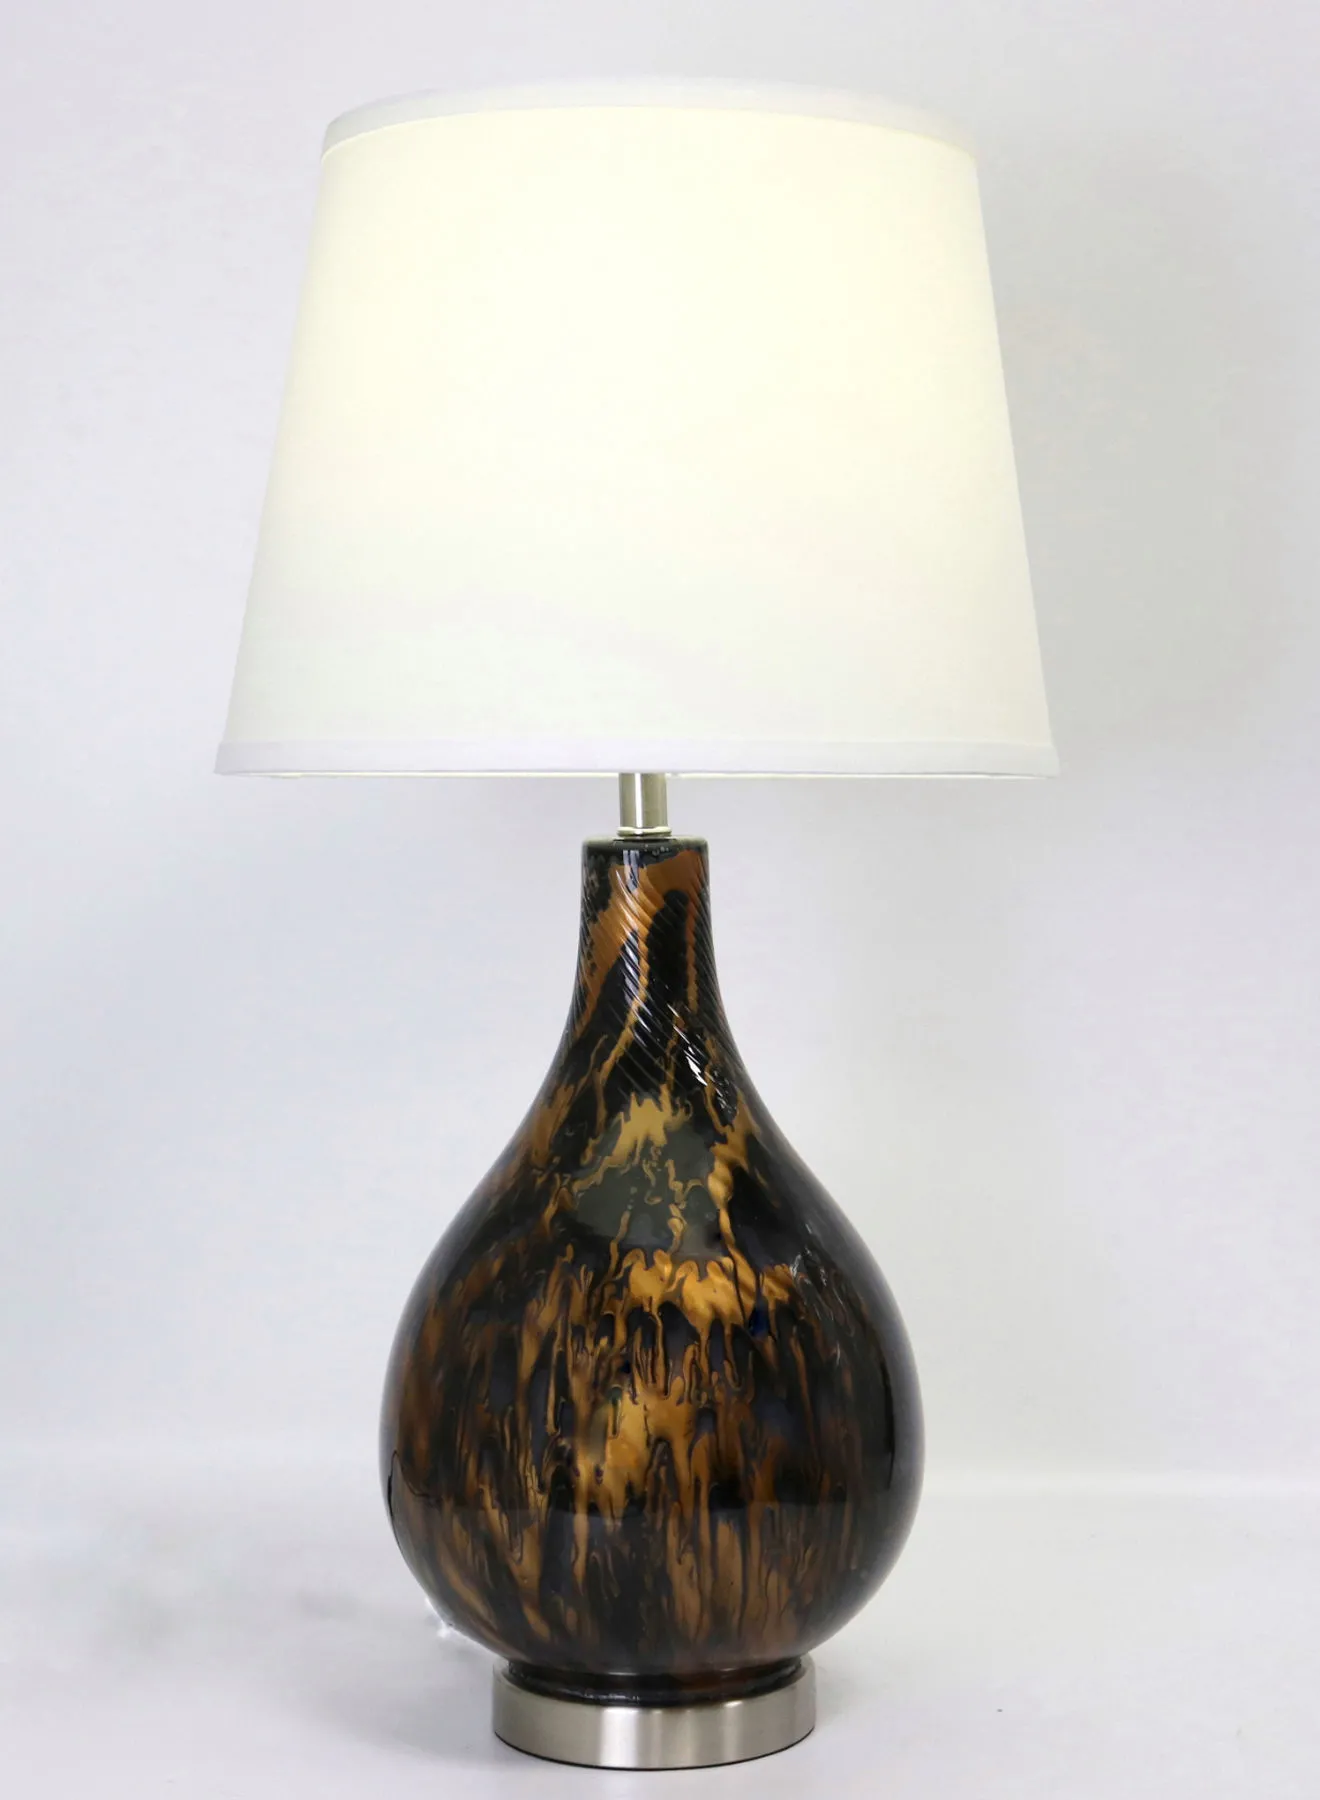 ebb & flow Modern Design Glass Table Lamp Unique Luxury Quality Material for the Perfect Stylish Home RSN71054-C Gold/Black 13 x 24.5